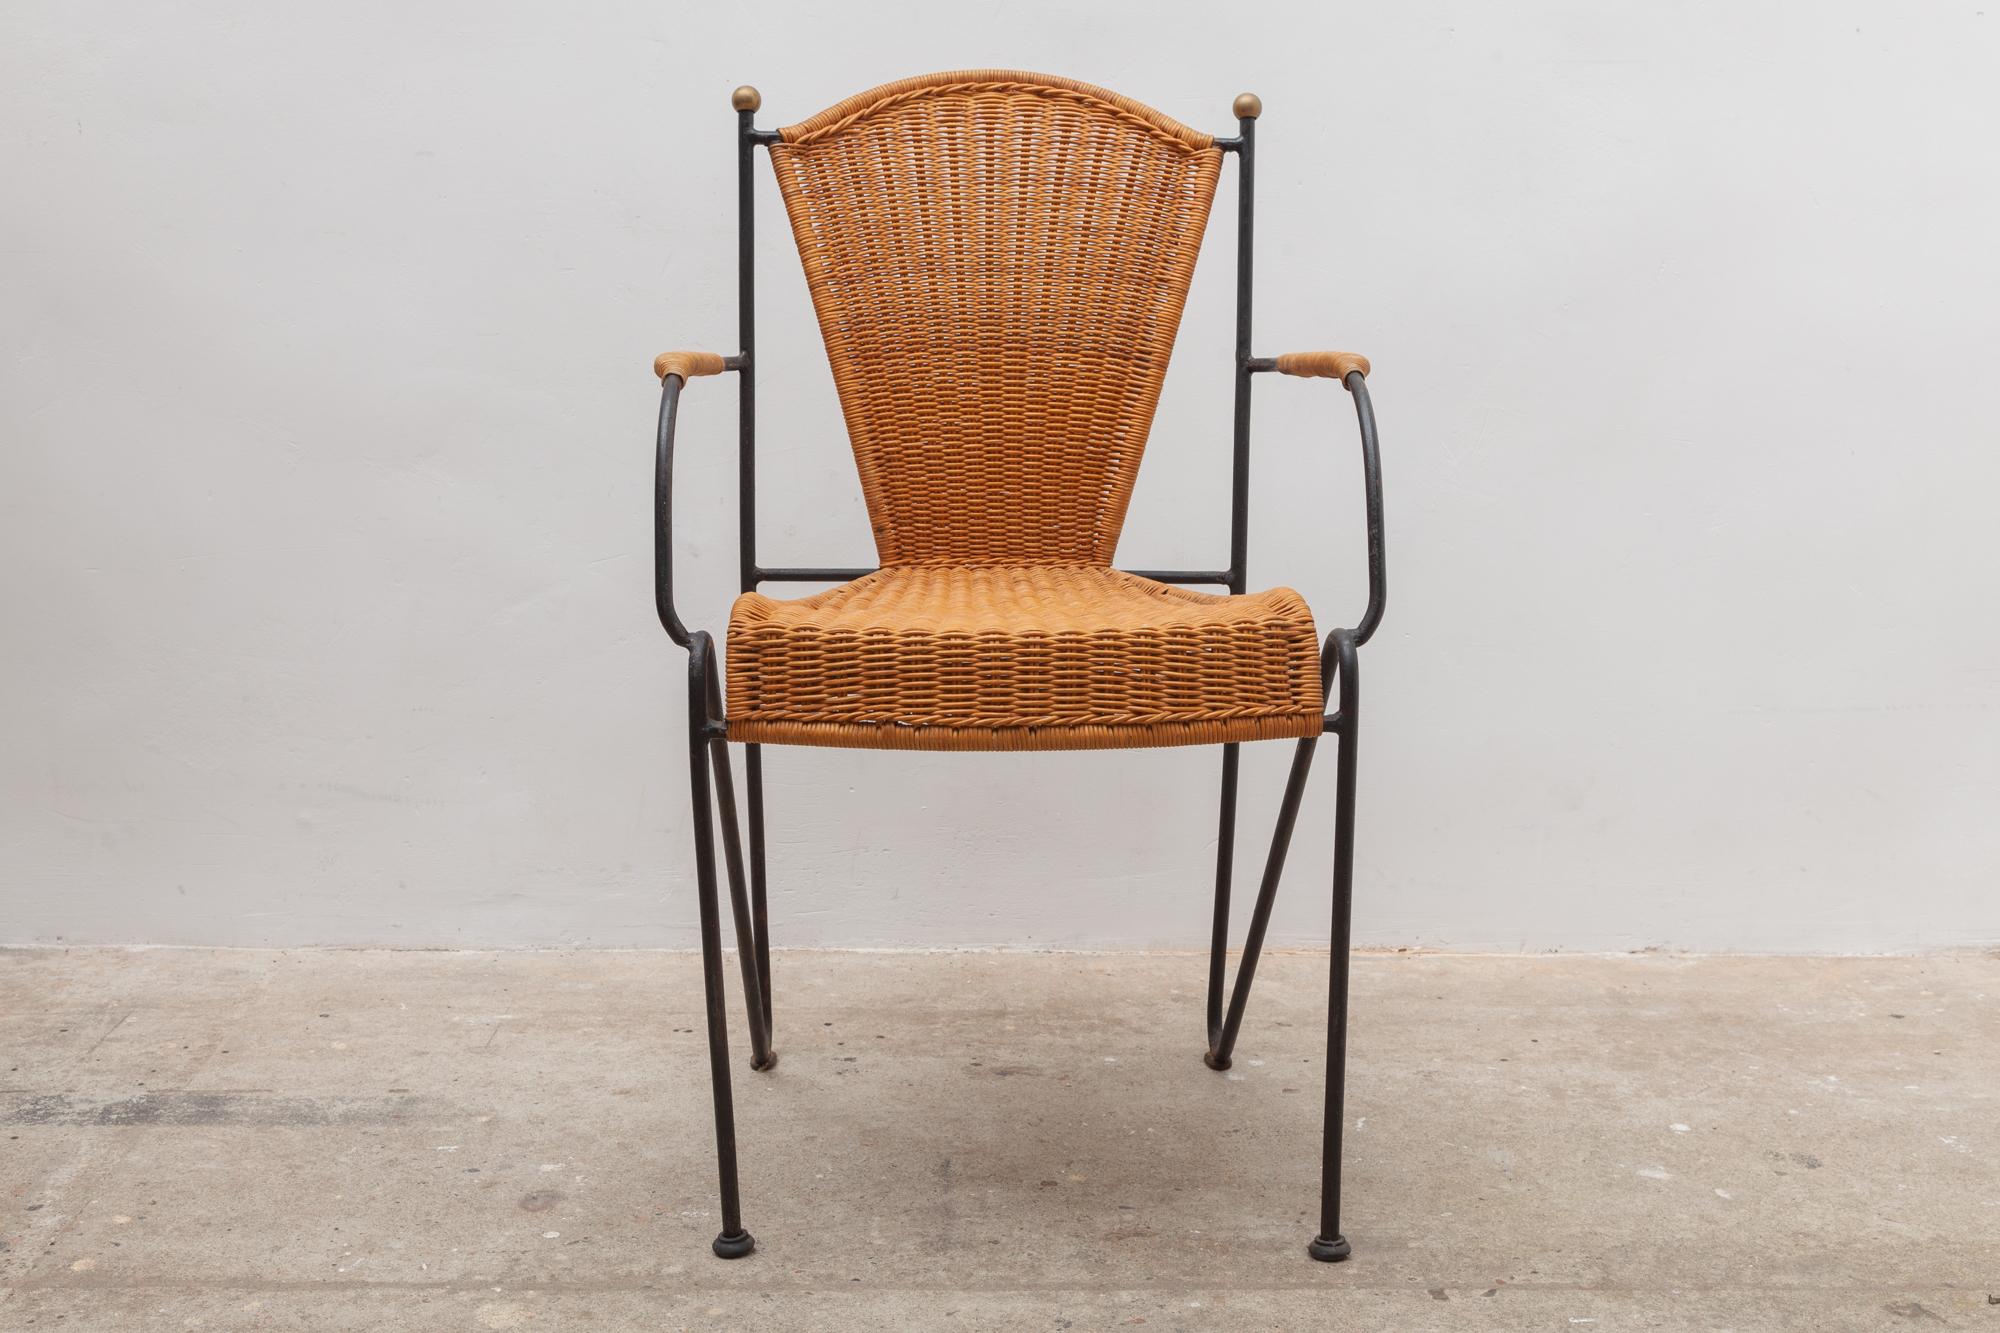 Central American Iron and Rattan Indoor and Outdoor Patio Chairs by Pipsan Saarinen Swanson